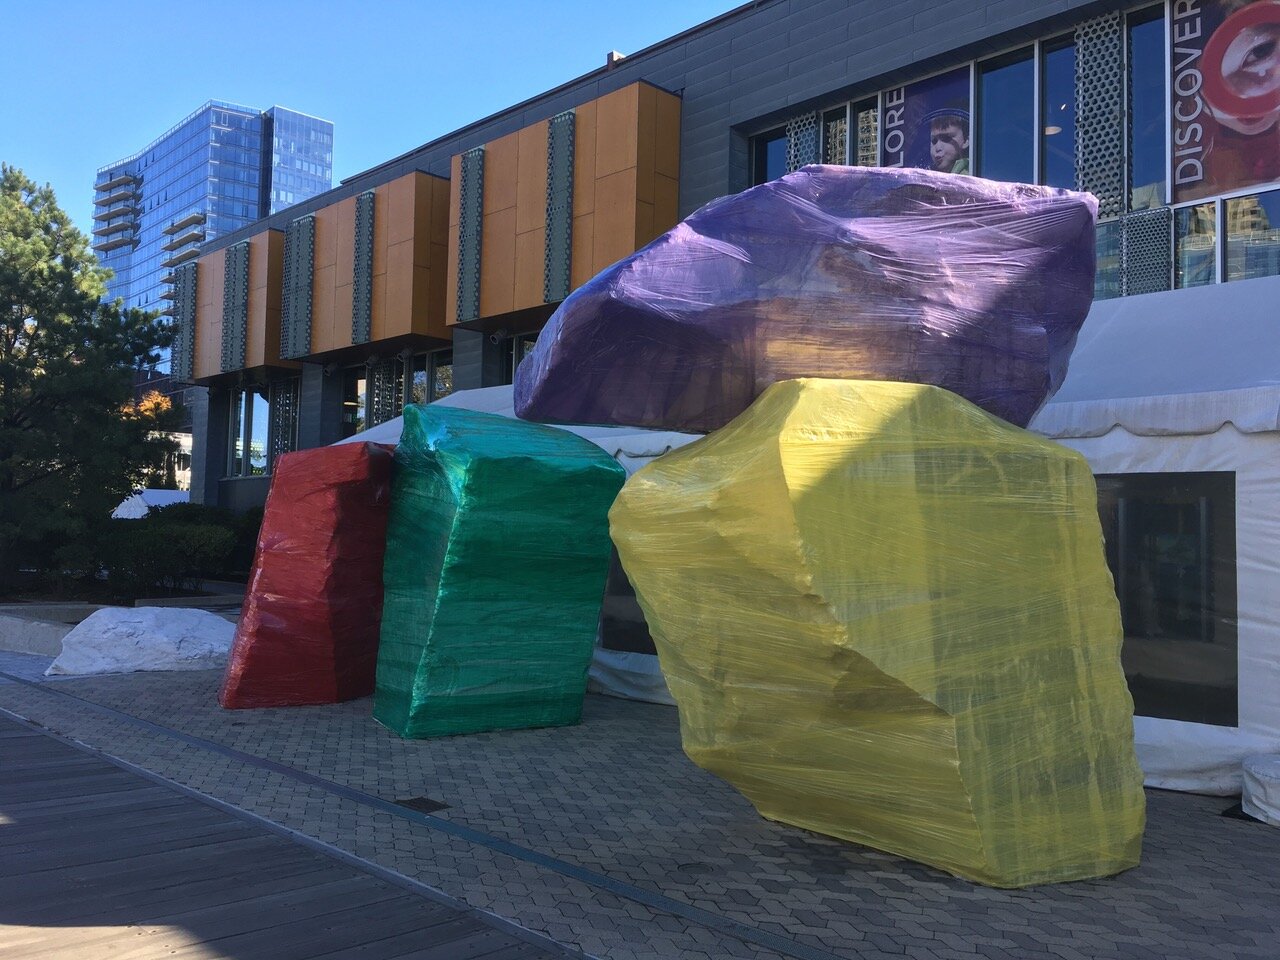 wRock wRap: Public art at the Children's Museum by Fort Point artist Peter Agoos